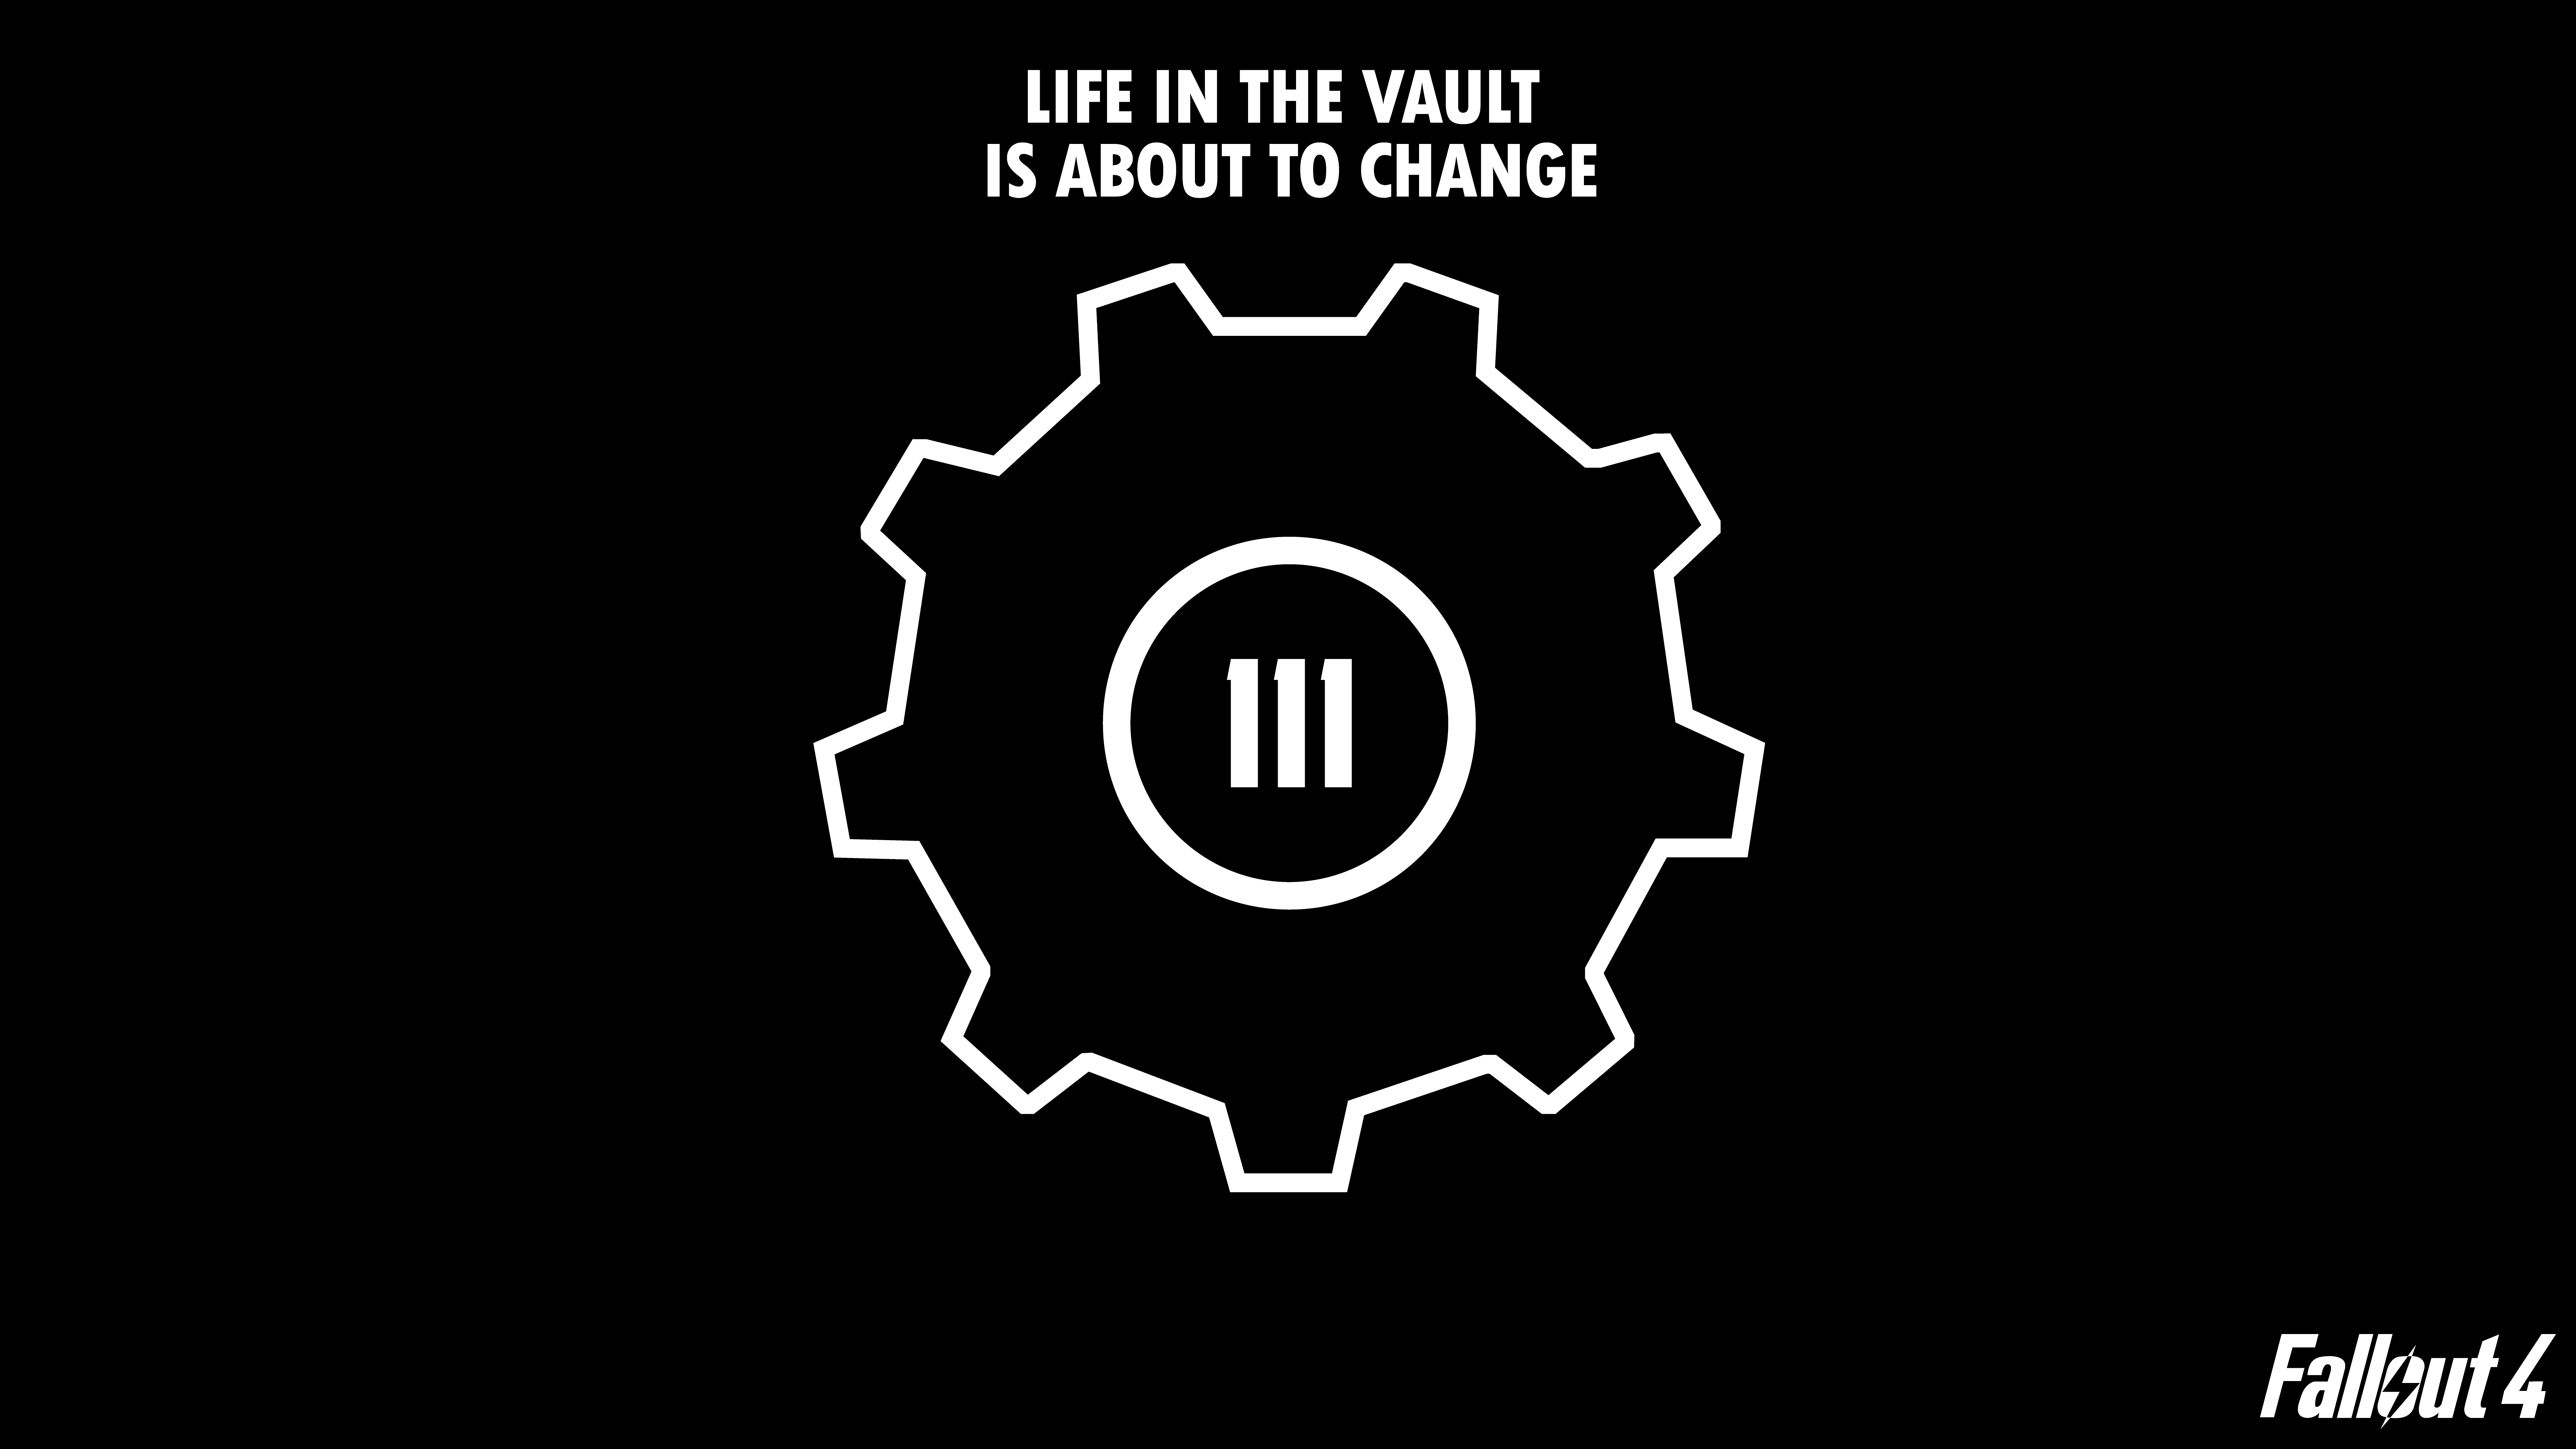 What's Up, Wasteland? Have 33 HD Fallout Wallpaper. Some OC Edited